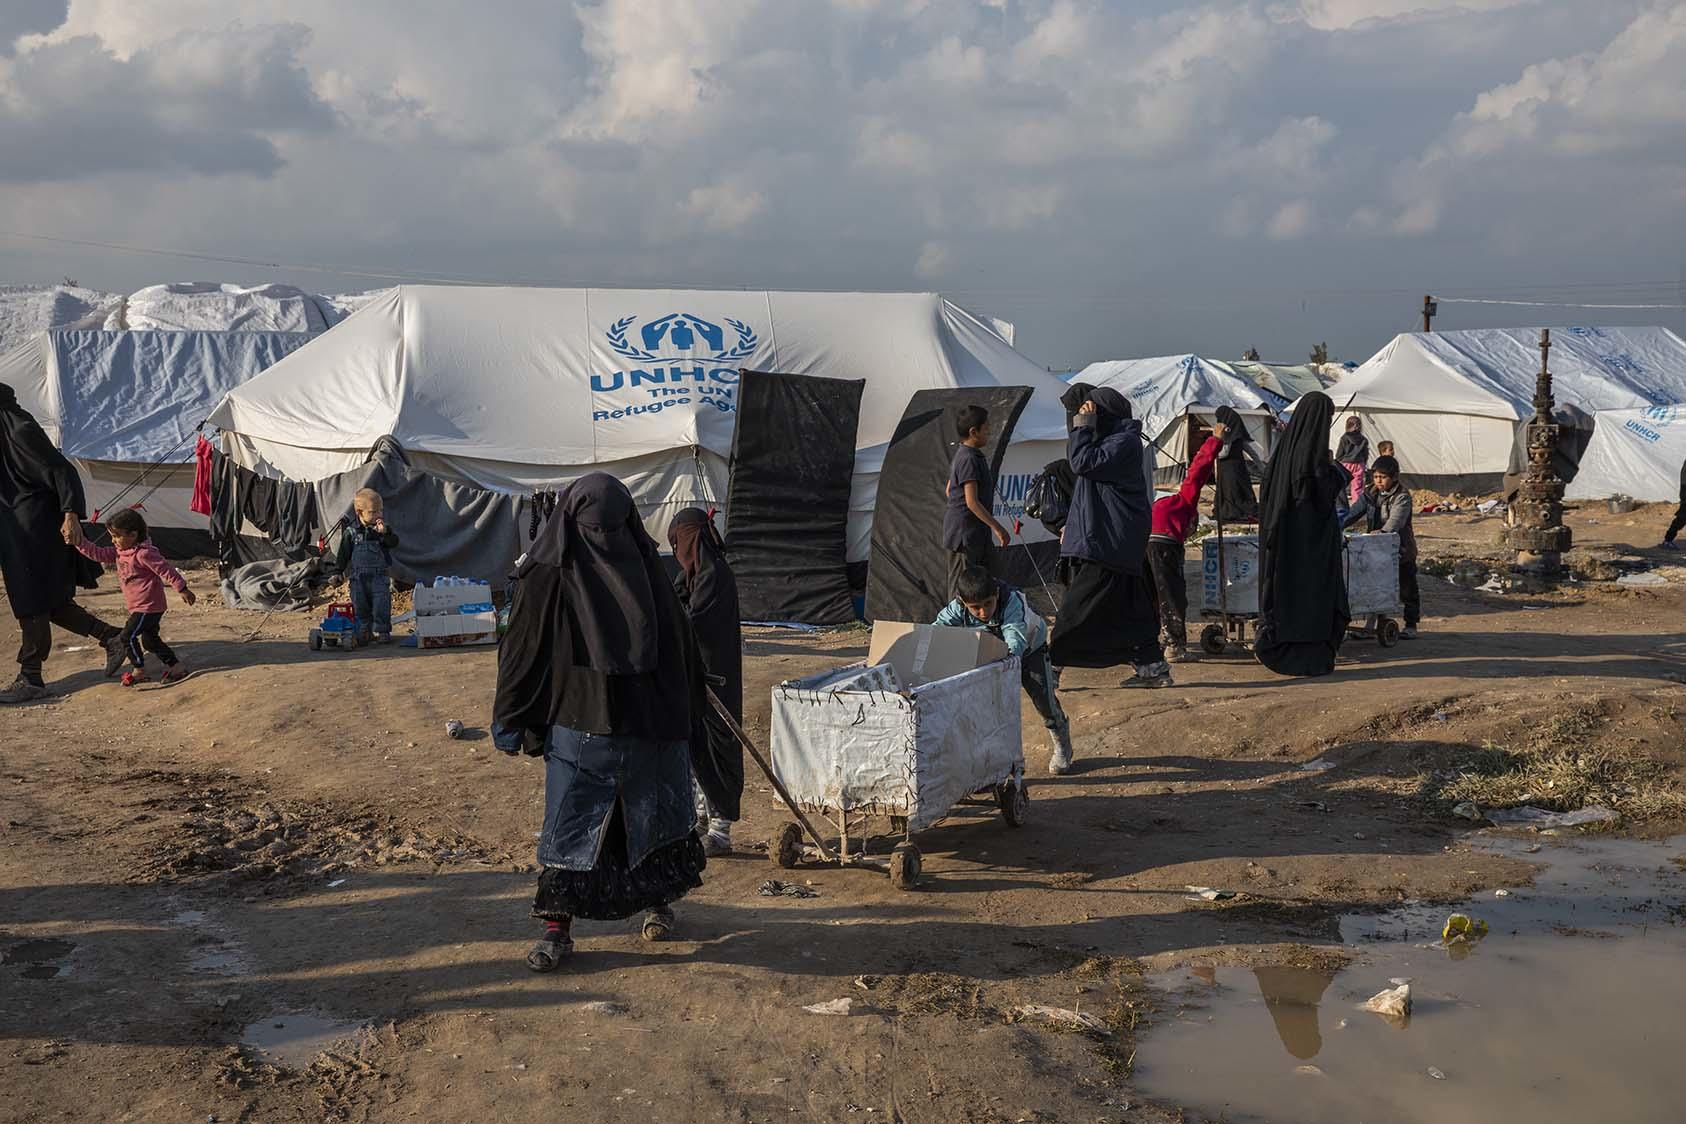 Families, ex-residents of the Islamic State, have lived since 2019 at the al-Hol camp. Governments have been slow to repatriate their citizens from this and other detention centers in Kurdish-controlled northeast Syria. (Ivor Prickett/The New York Times)